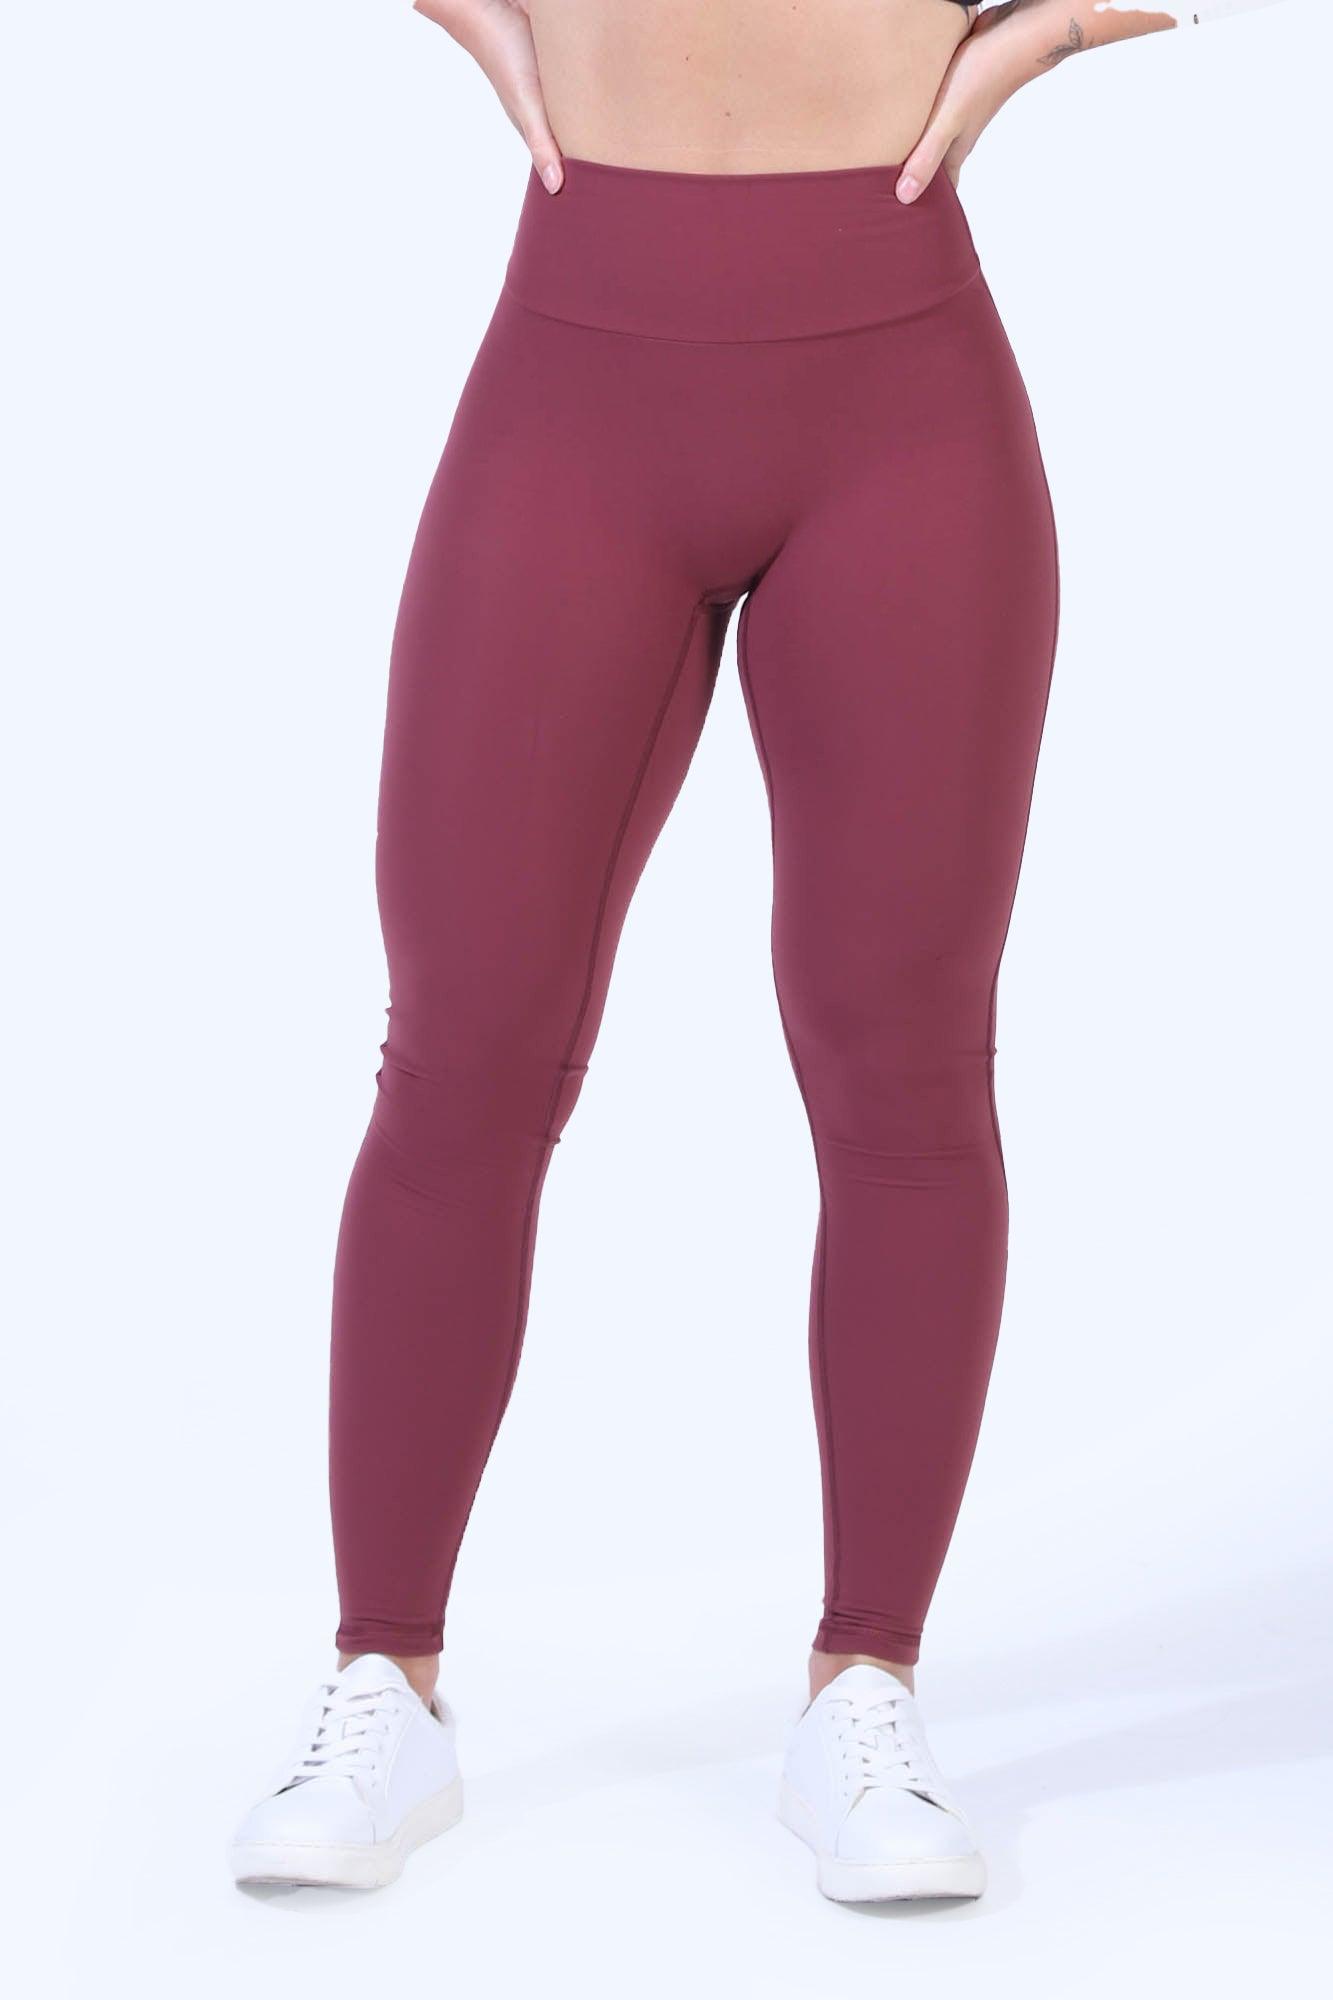 Butt Lifting Leggings With Pockets For Women Stretch Cargo